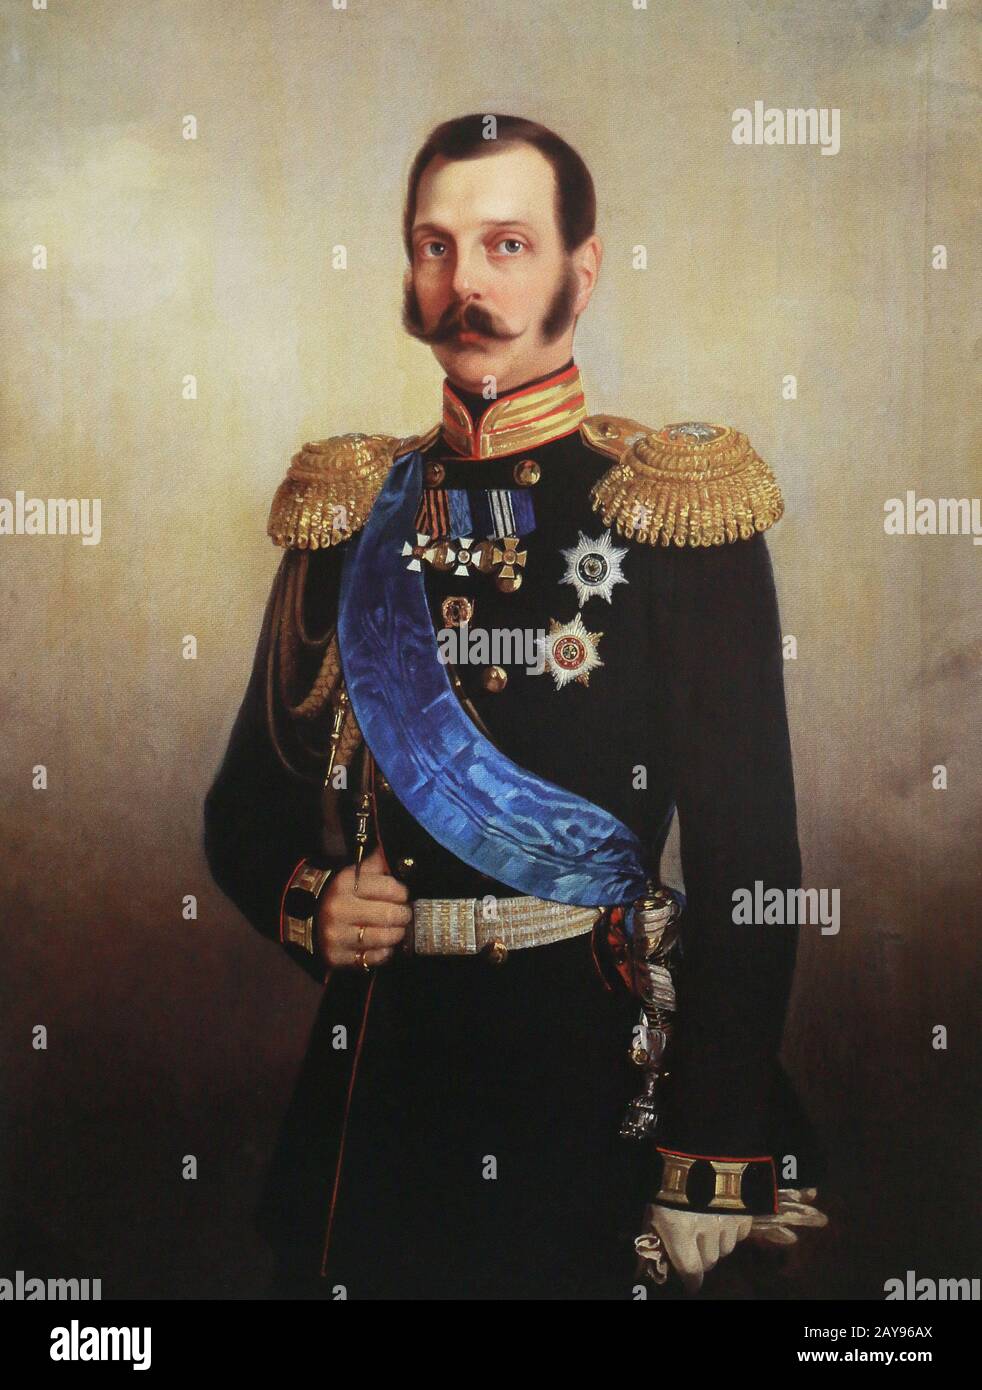 Russian Emperor Alexander II Nikolaevich. Painting of the 19th century. Stock Photo